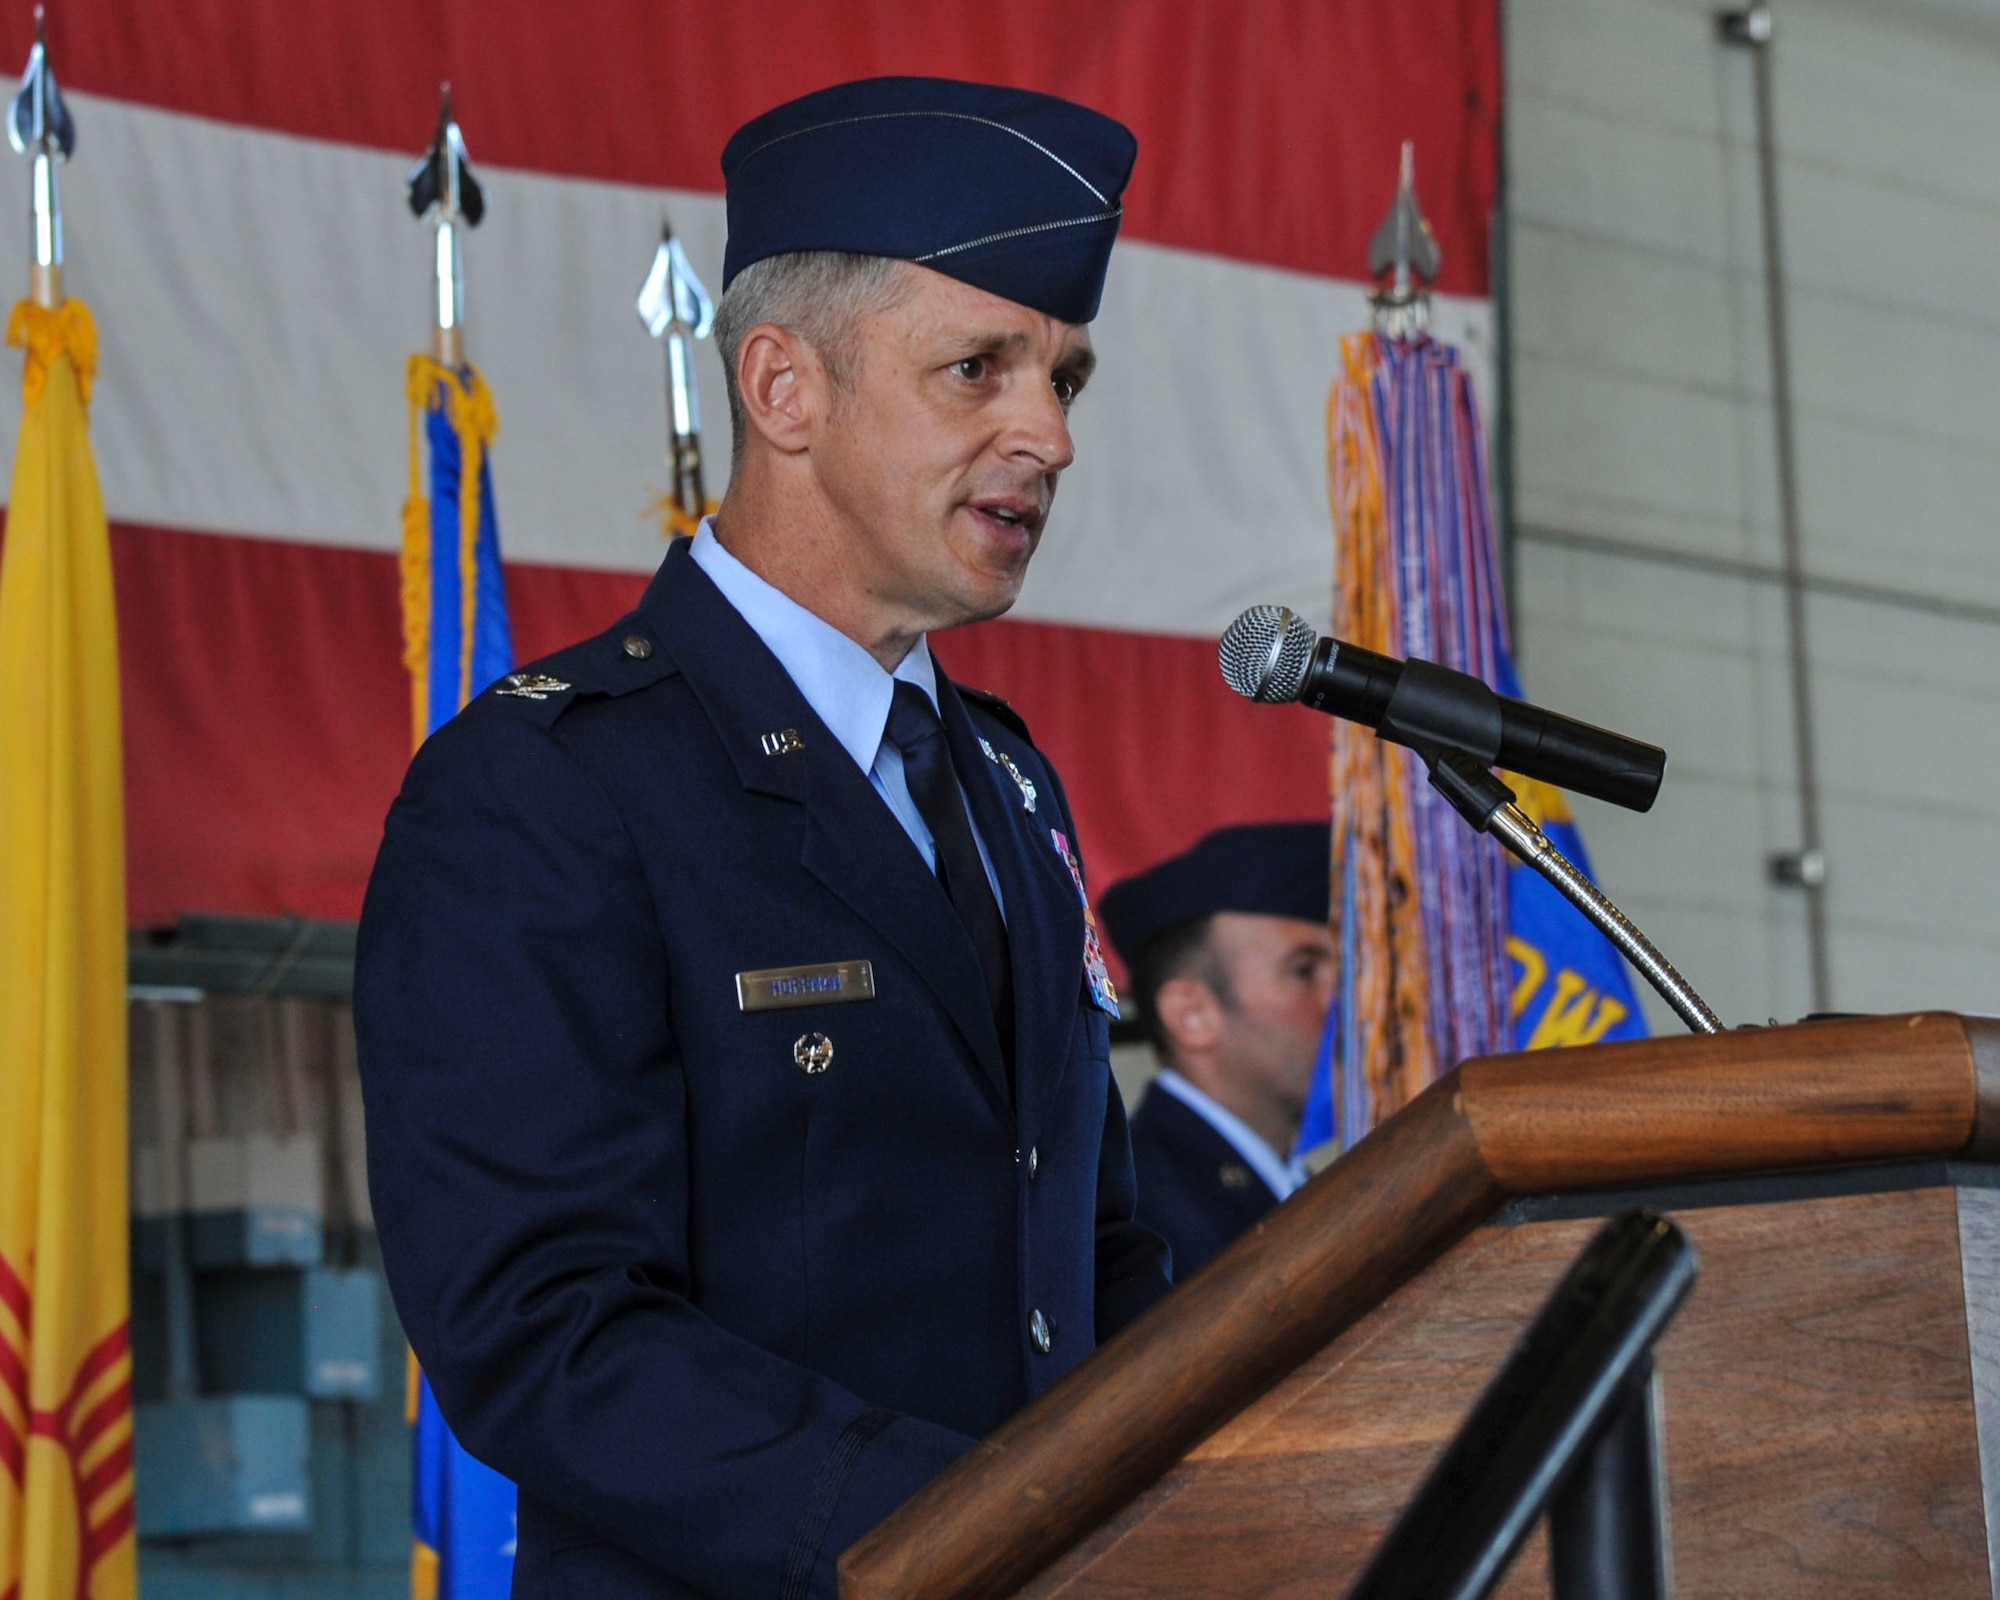 Col. Justin Hoffman speaks during the 58th Special Operations Wing change of command ceremony here July 13. U.S. Air Force  Maj. Gen. Patrick J. Doherty,  commander of the 19th Air Force at Joint Base San Antonio-Randolph, Texas officiated. The ceremony officially recognized U.S. Air Force Col. Brenda P. Cartier, the outgoing 58th SOW Commander and Hoffman as the incoming commander. (U.S. Air Force photo by Jim Fisher)